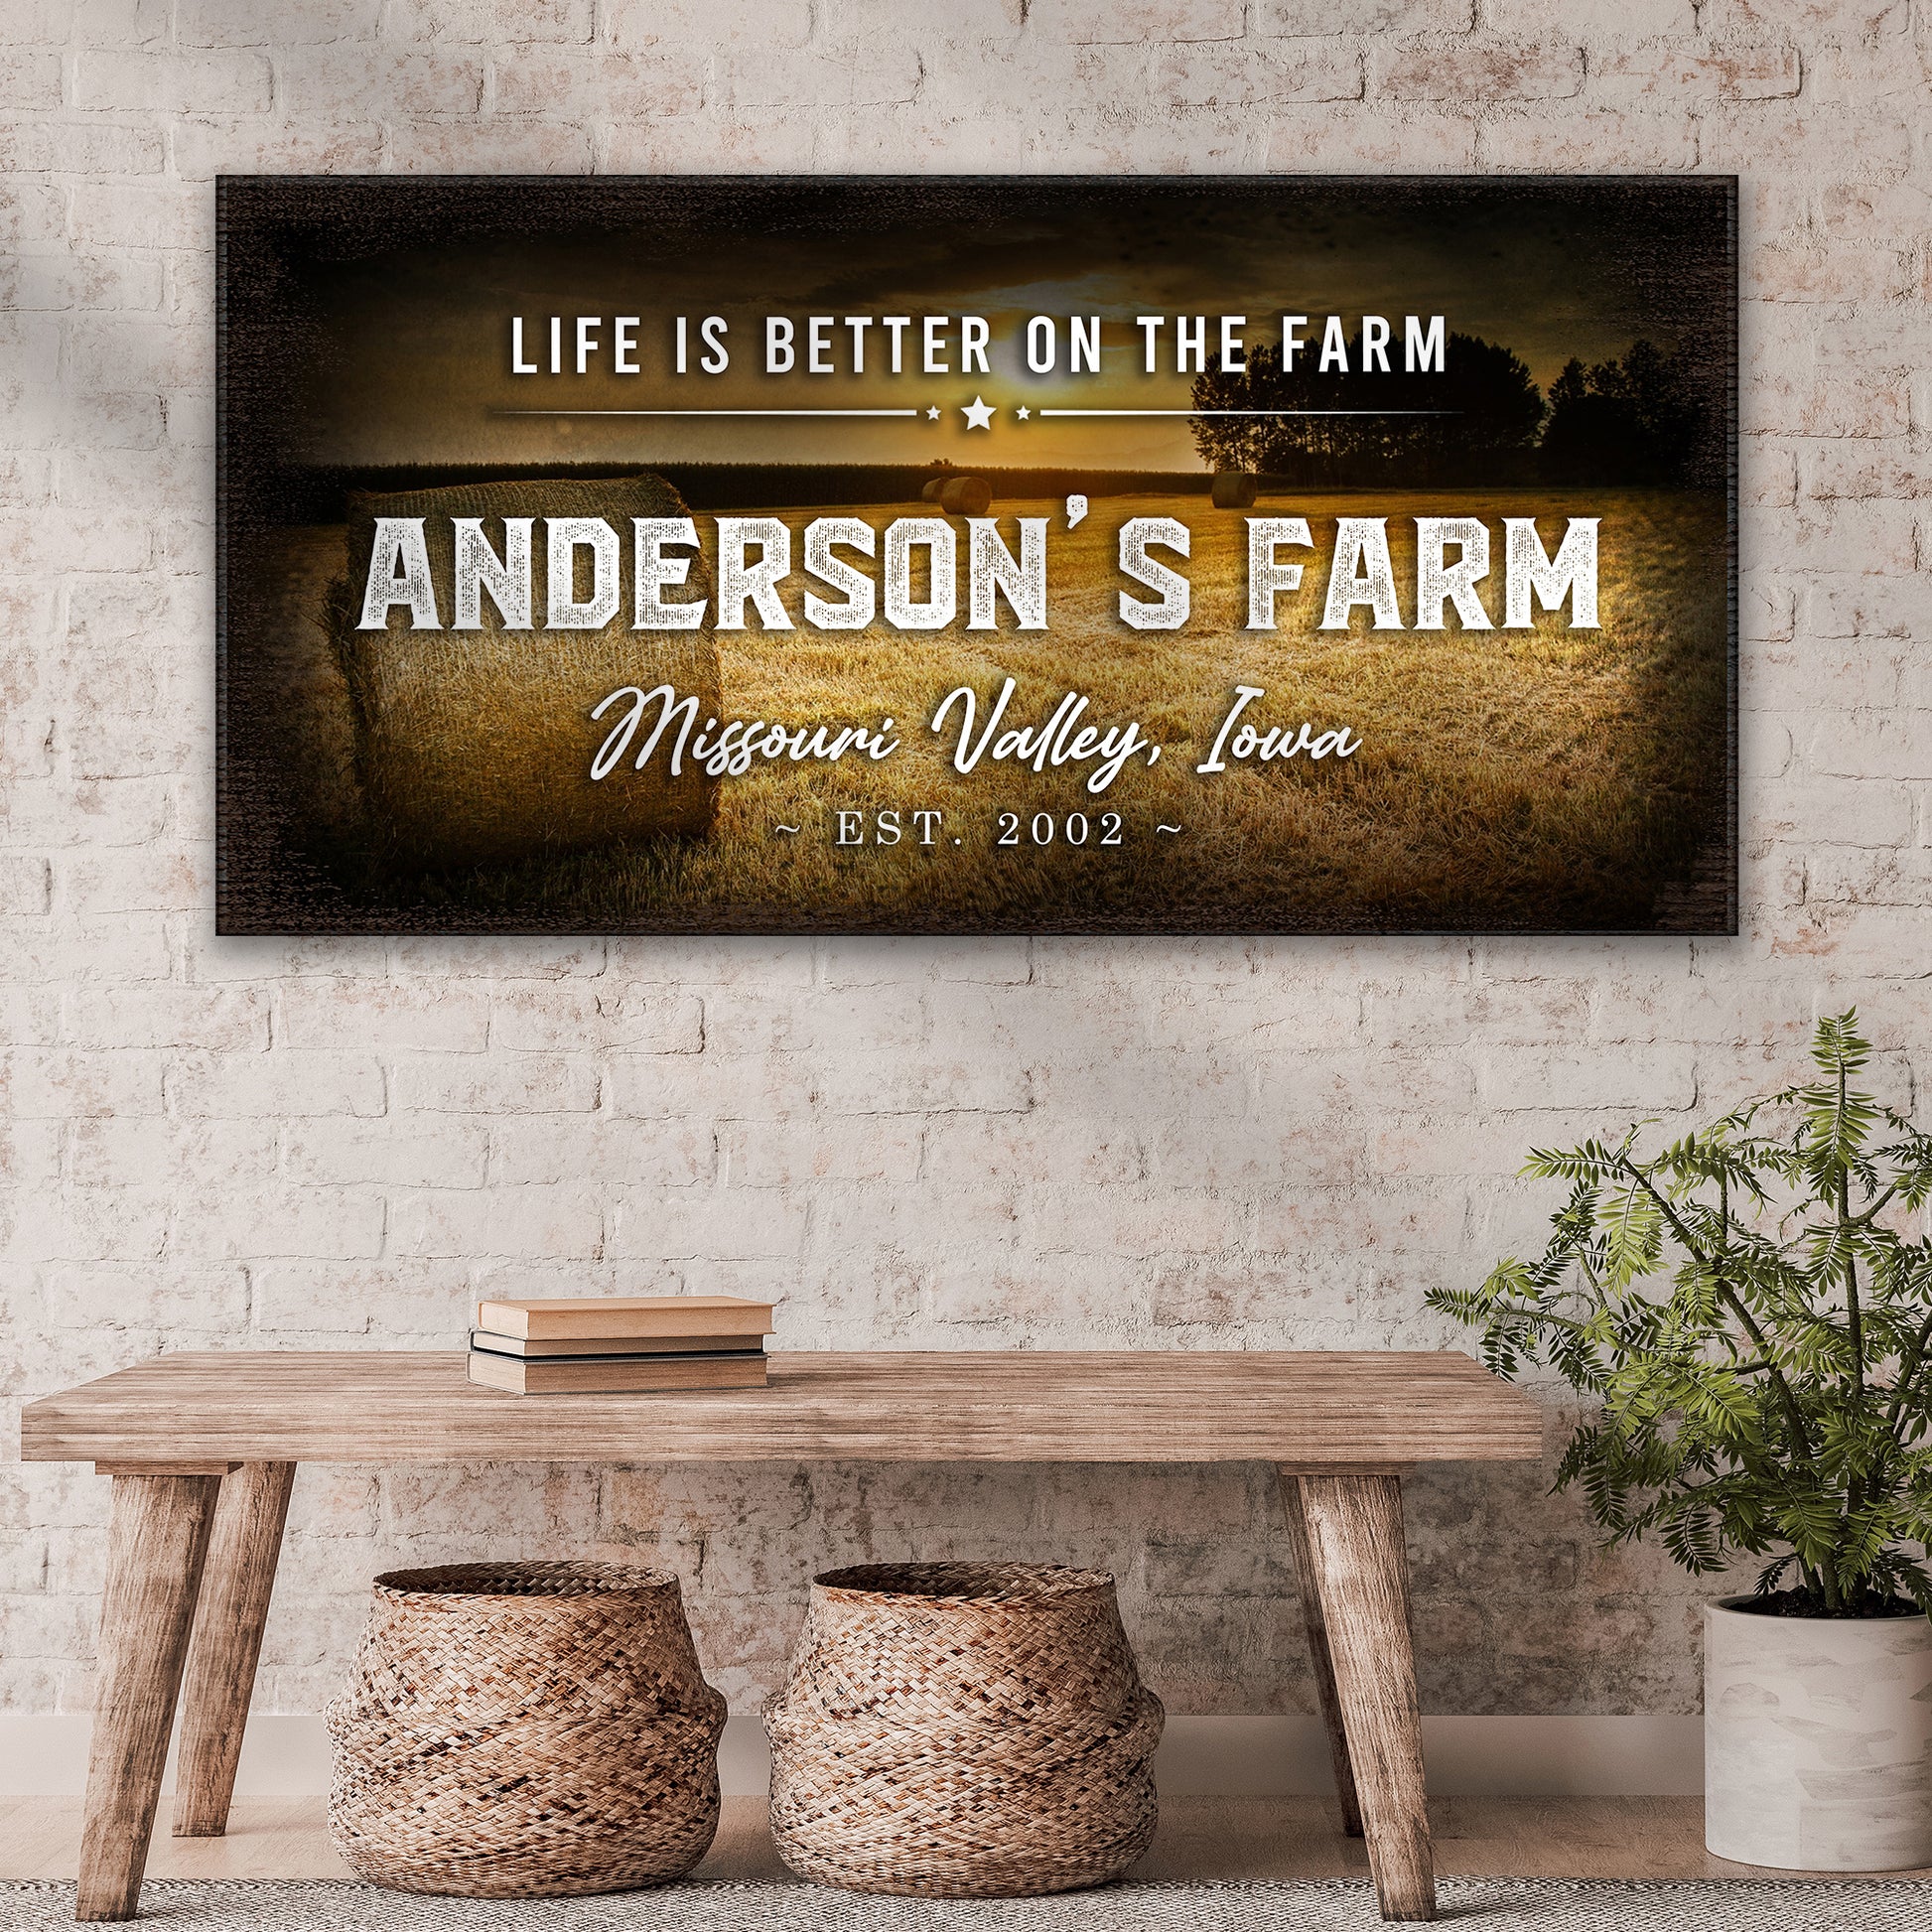 Life Is Better On The Farm Sign II - Image by Tailored Canvases